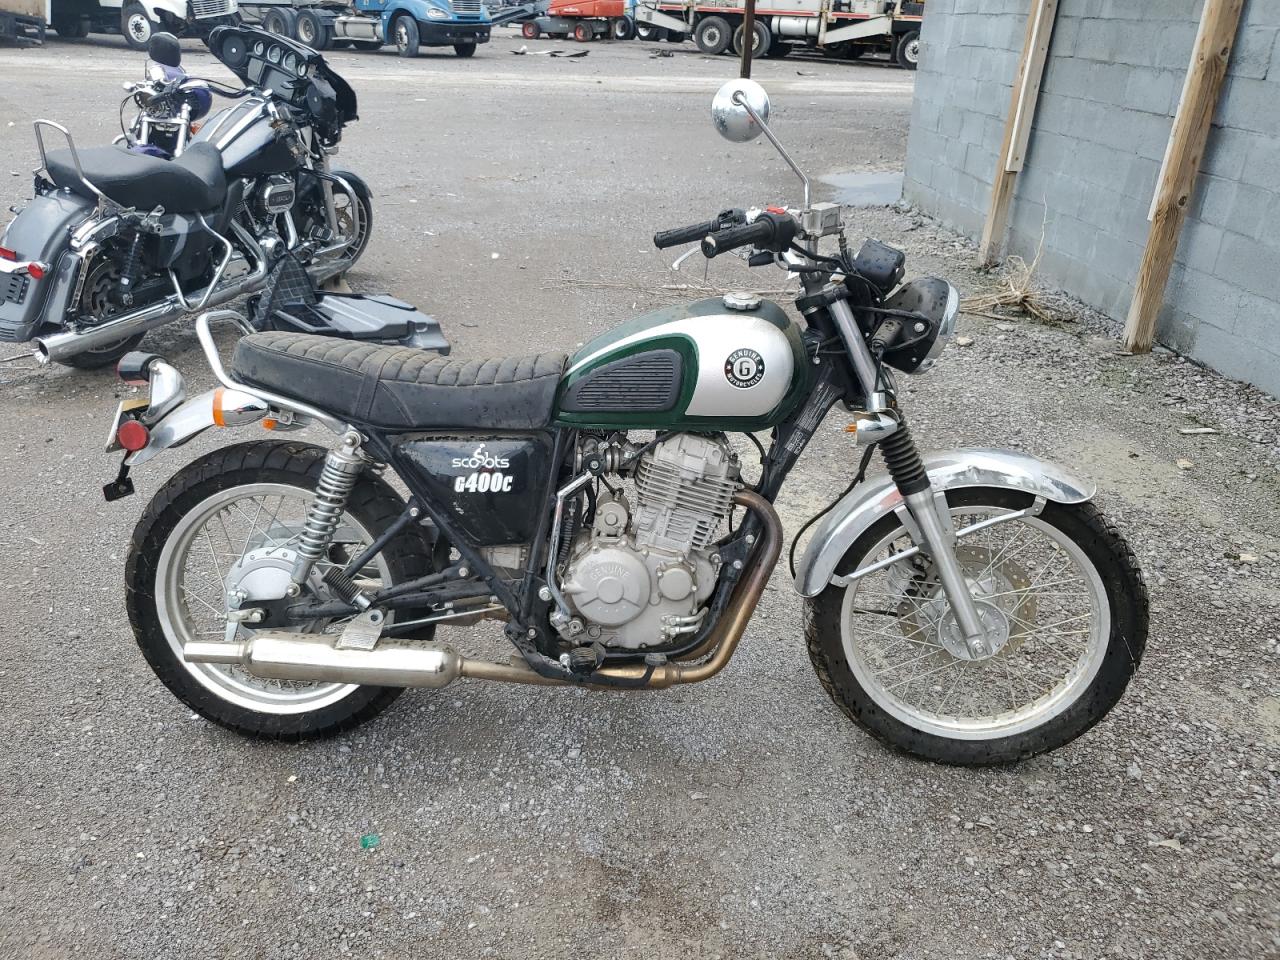  Salvage Genuine Scooter Co. Motorcycle